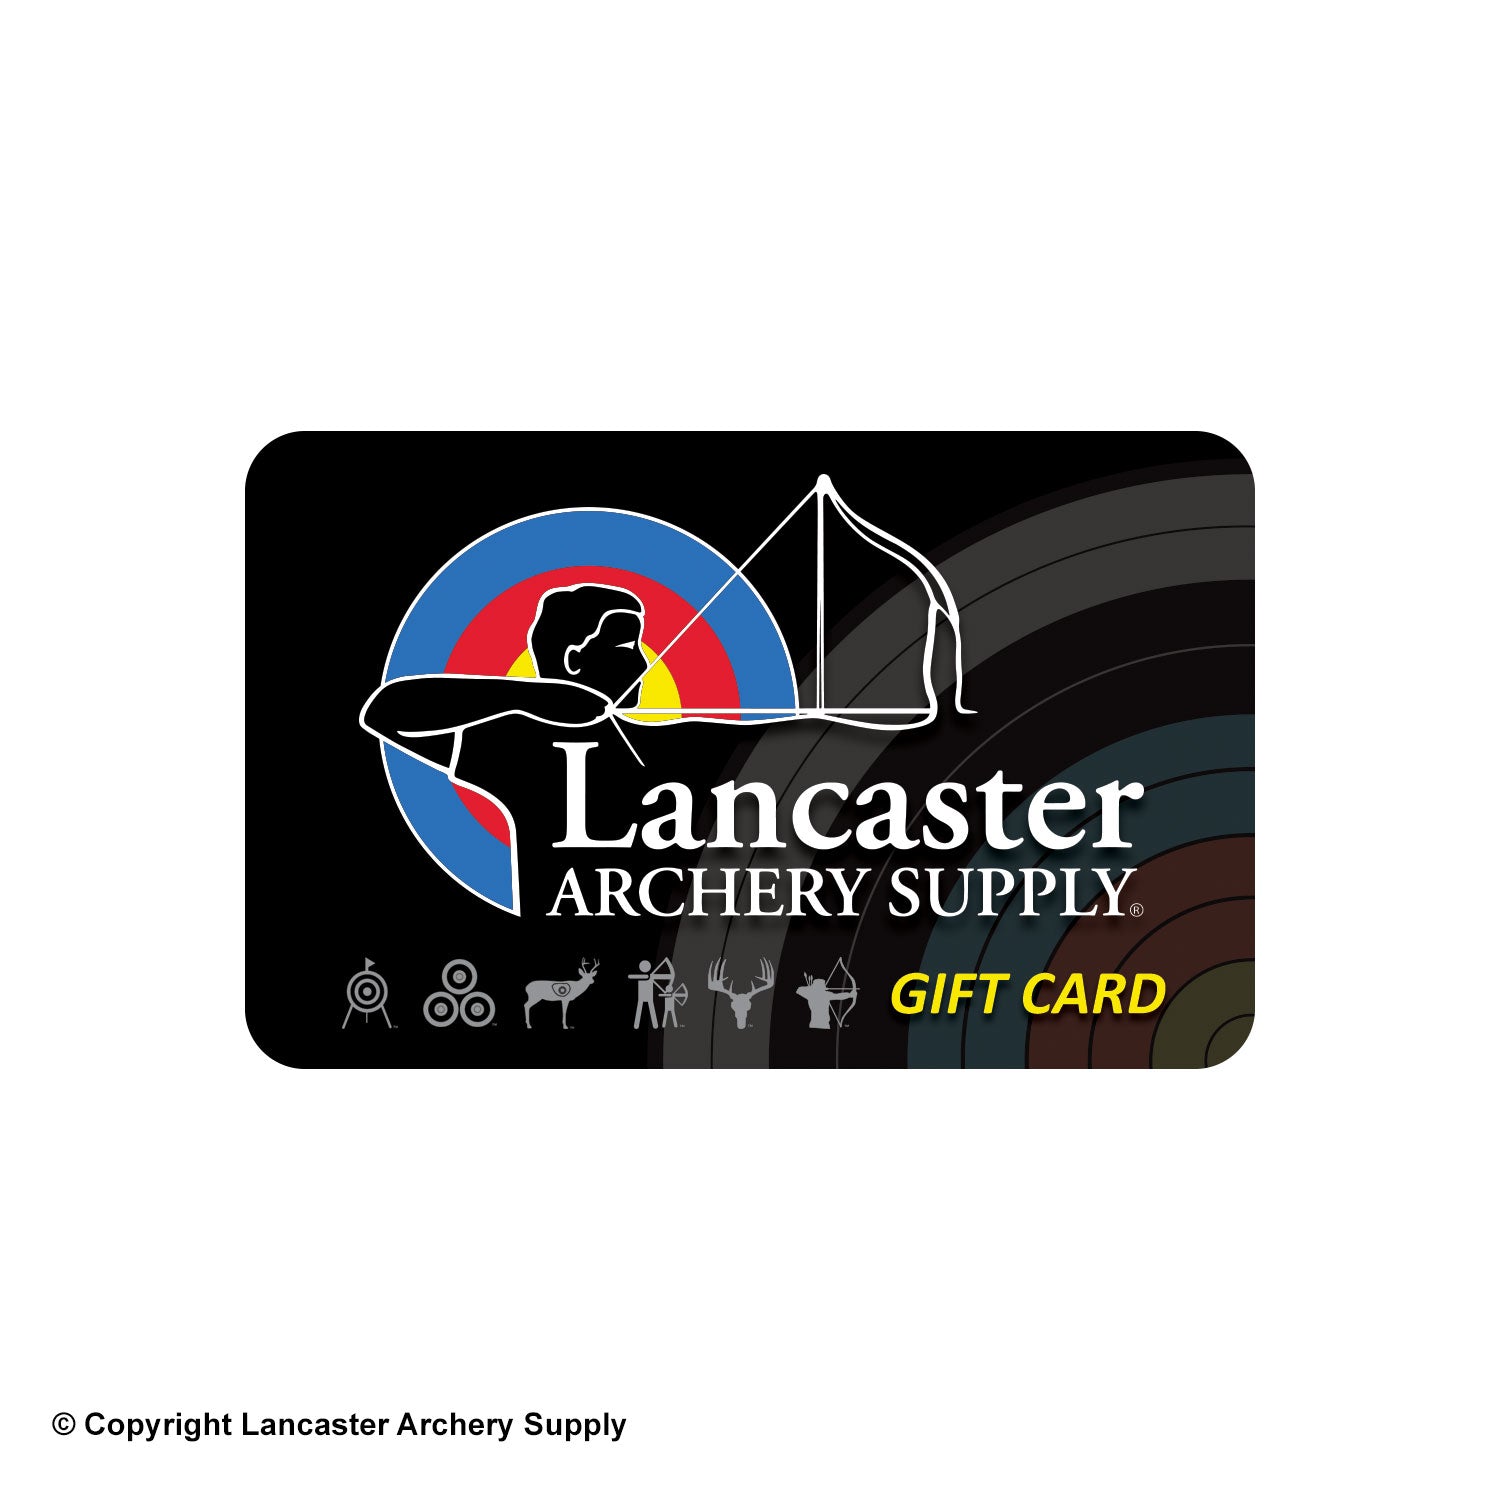 Lancaster Archery Supply Promo Gift Card